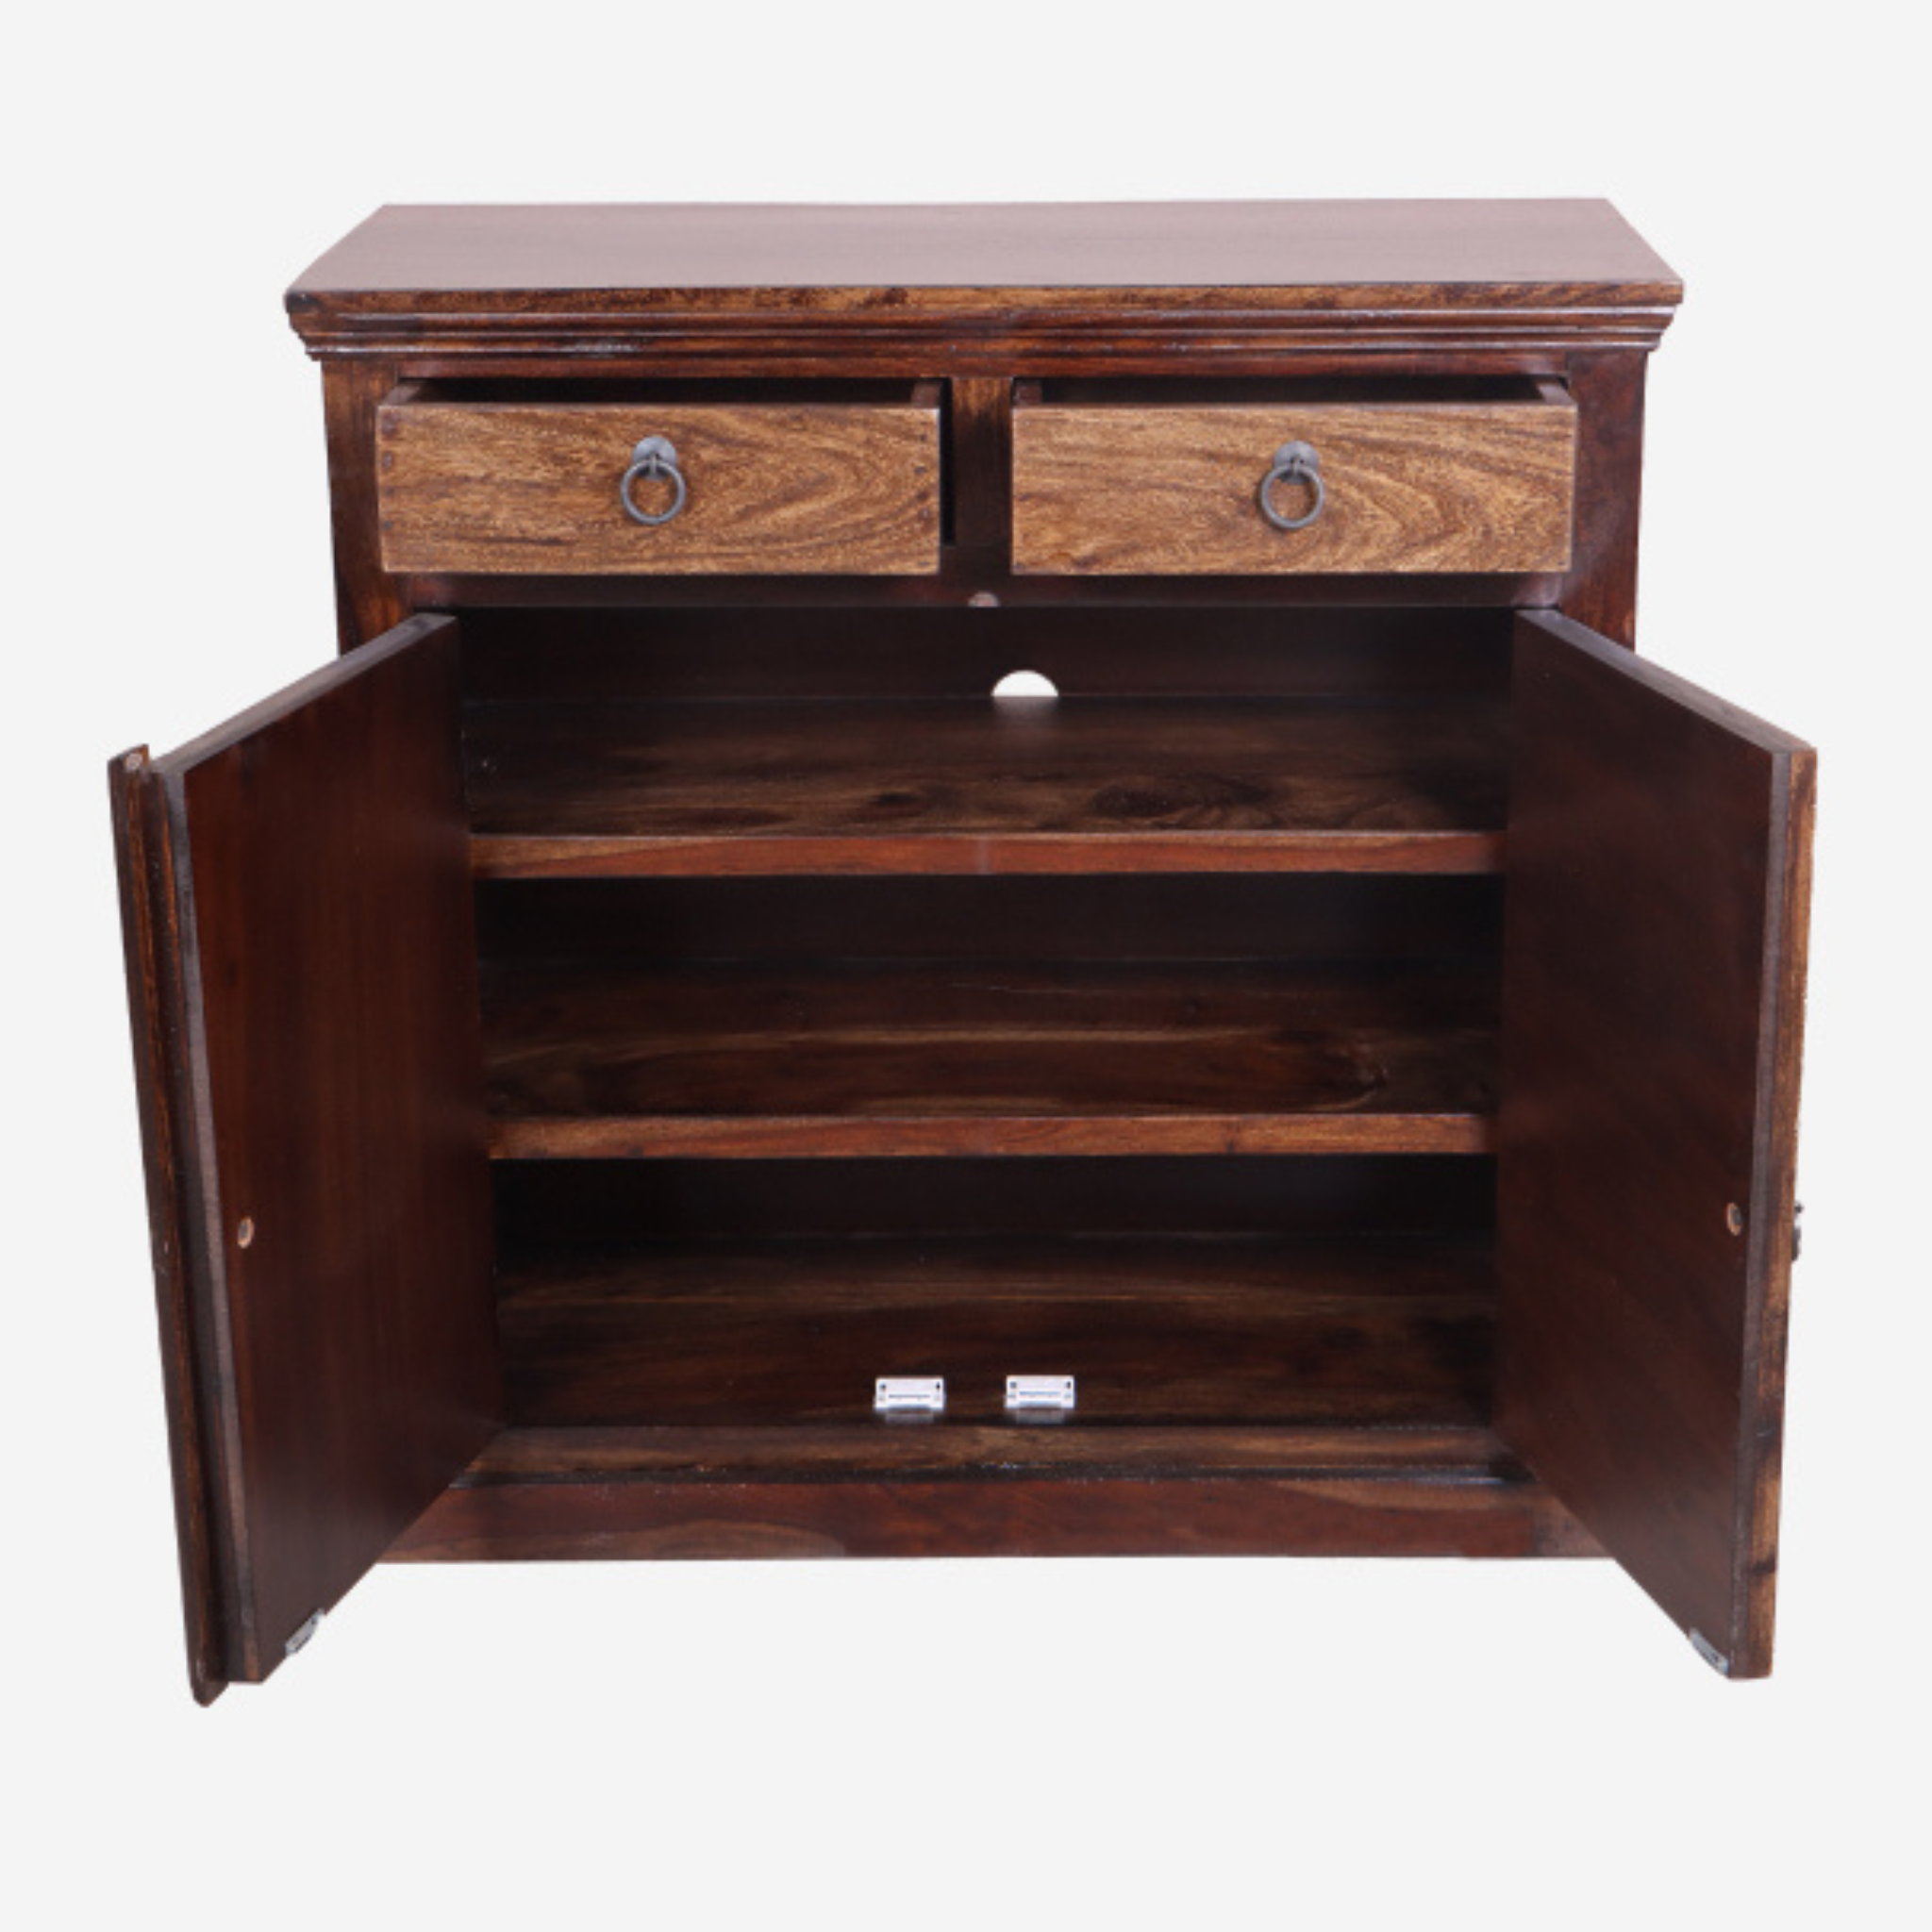 Bakra Shoerack with Two Drawer